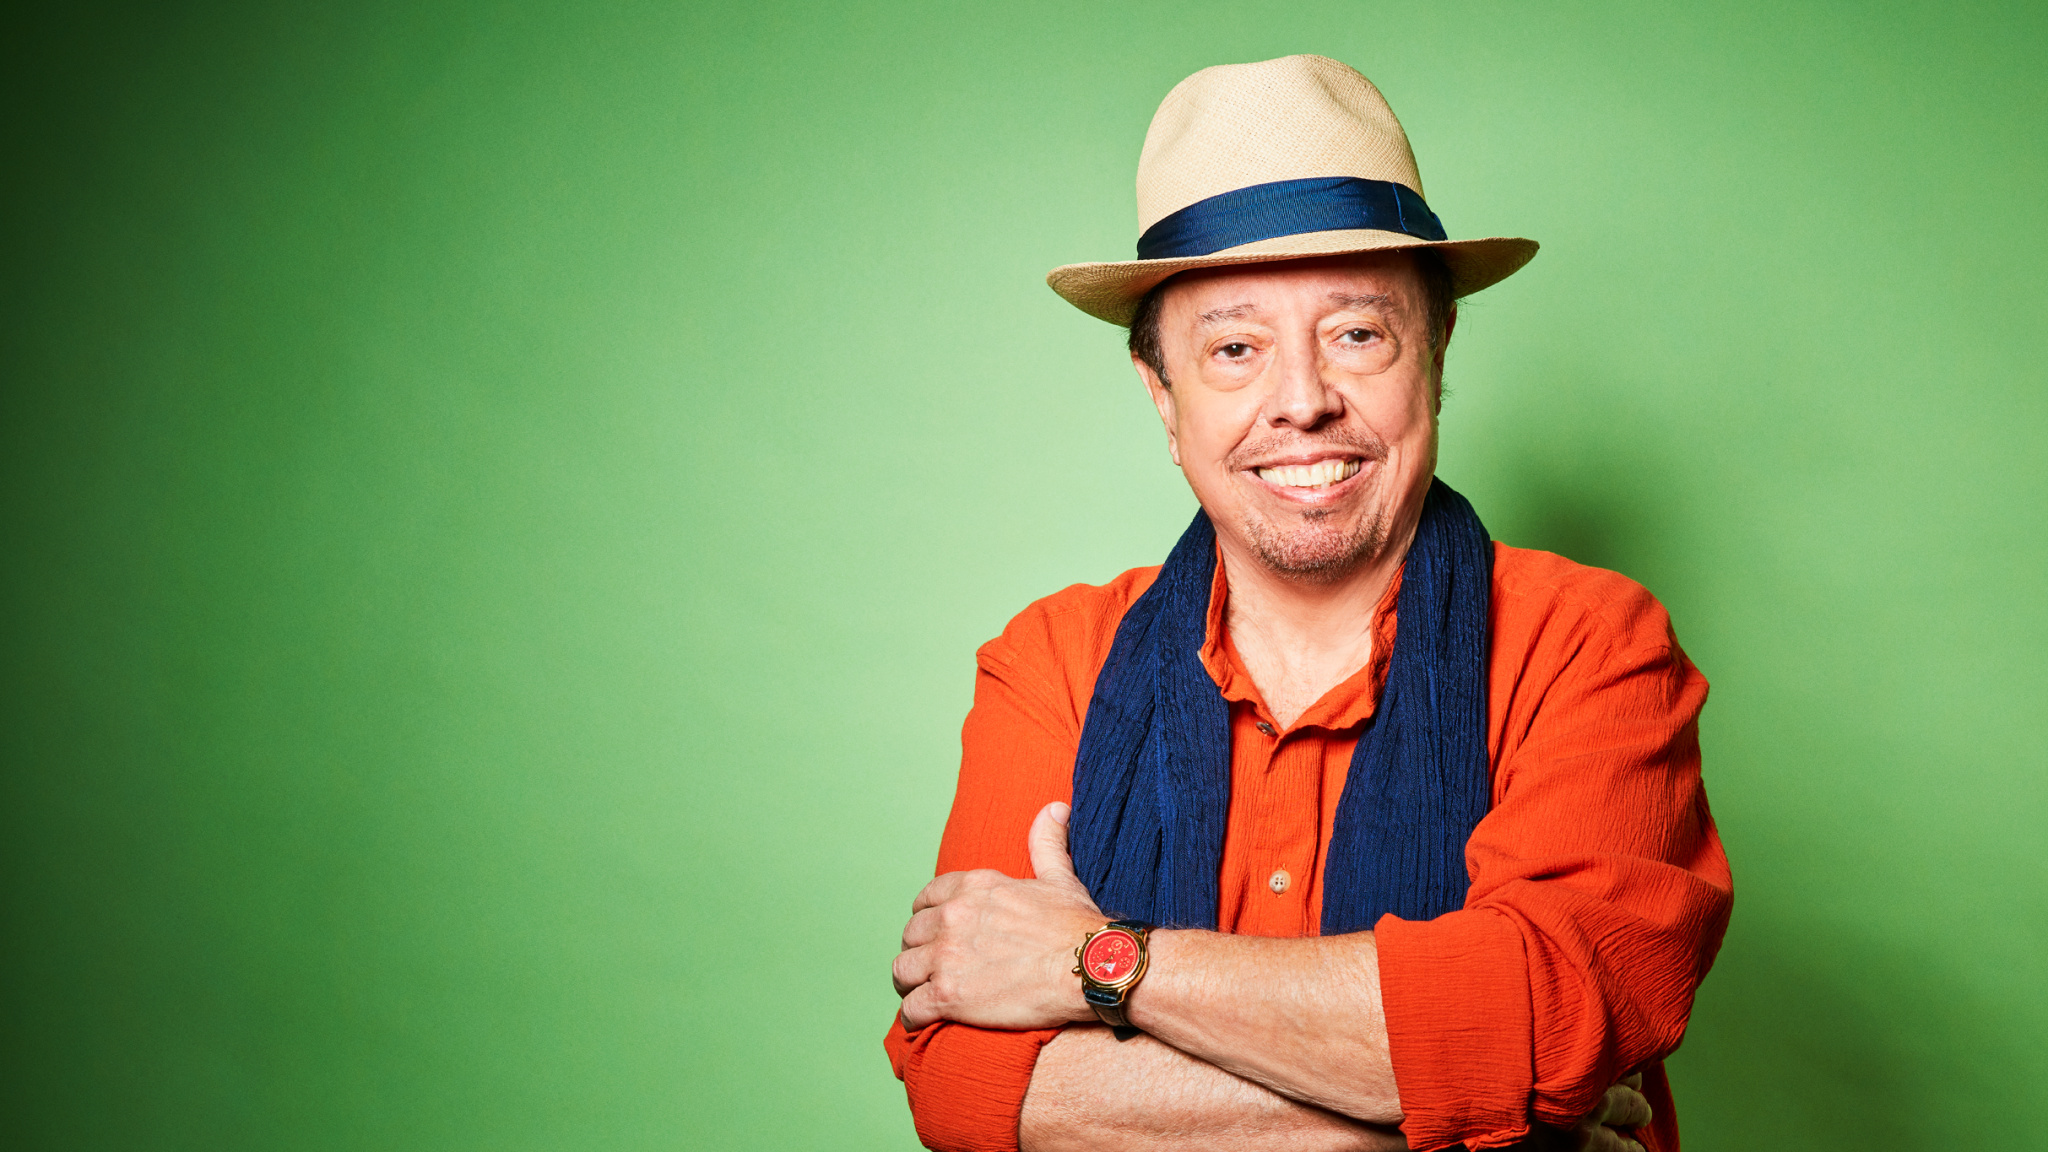 Sergio Mendes with a beaming smile posing confidently against a green background, dressed in a vibrant orange shirt, blue scarf, and a stylish straw hat, exuding charisma and joy.